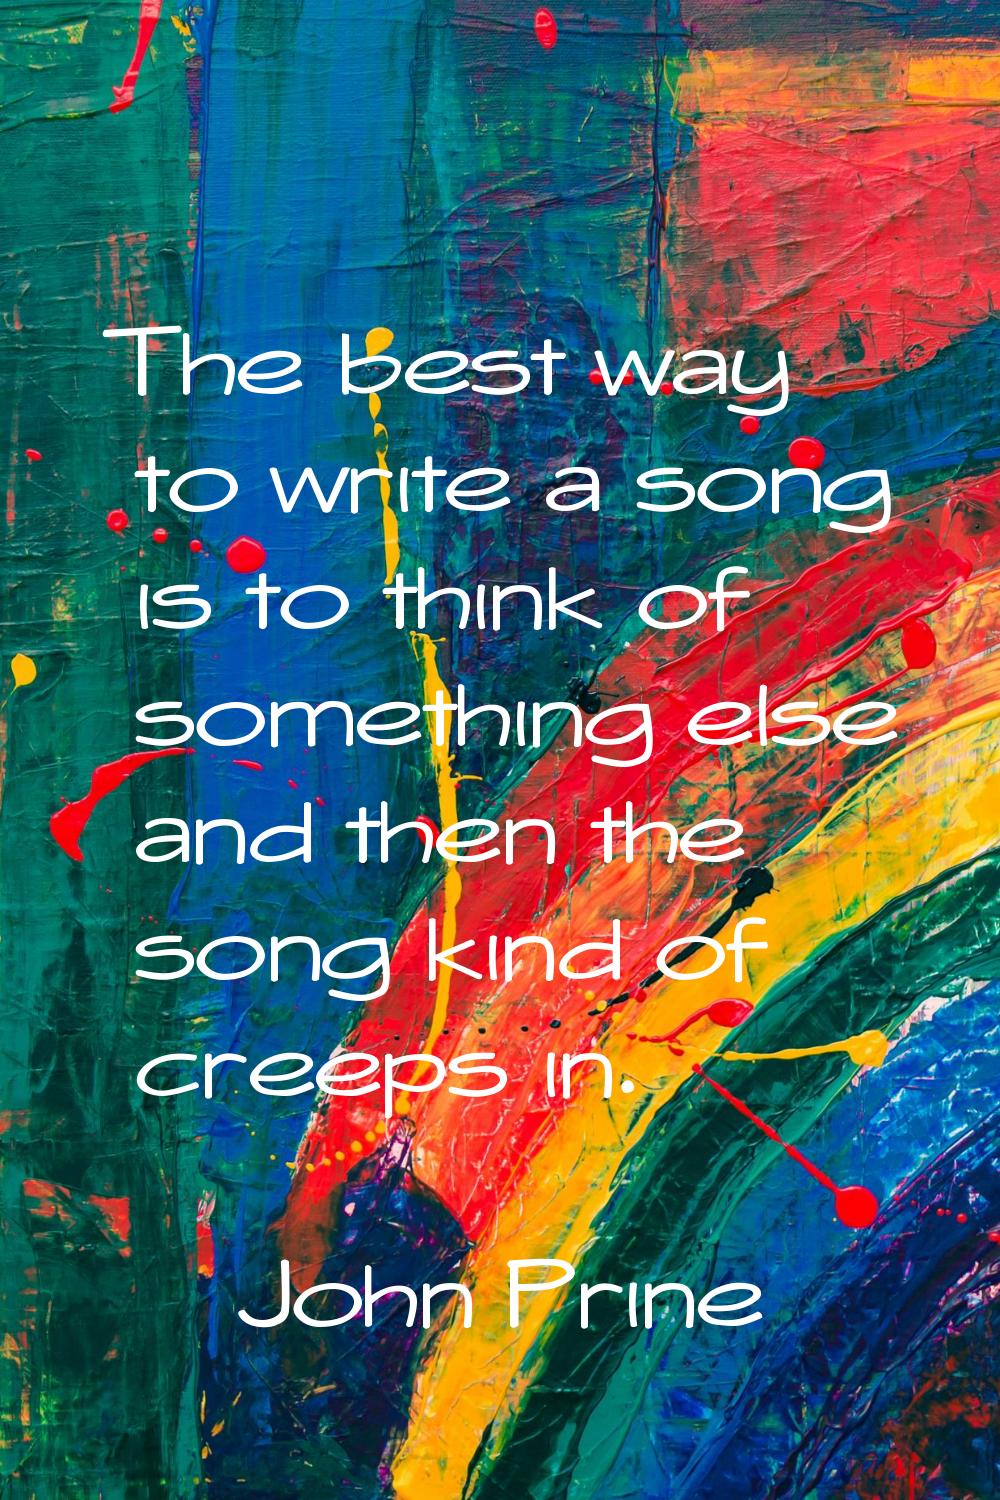 The best way to write a song is to think of something else and then the song kind of creeps in.